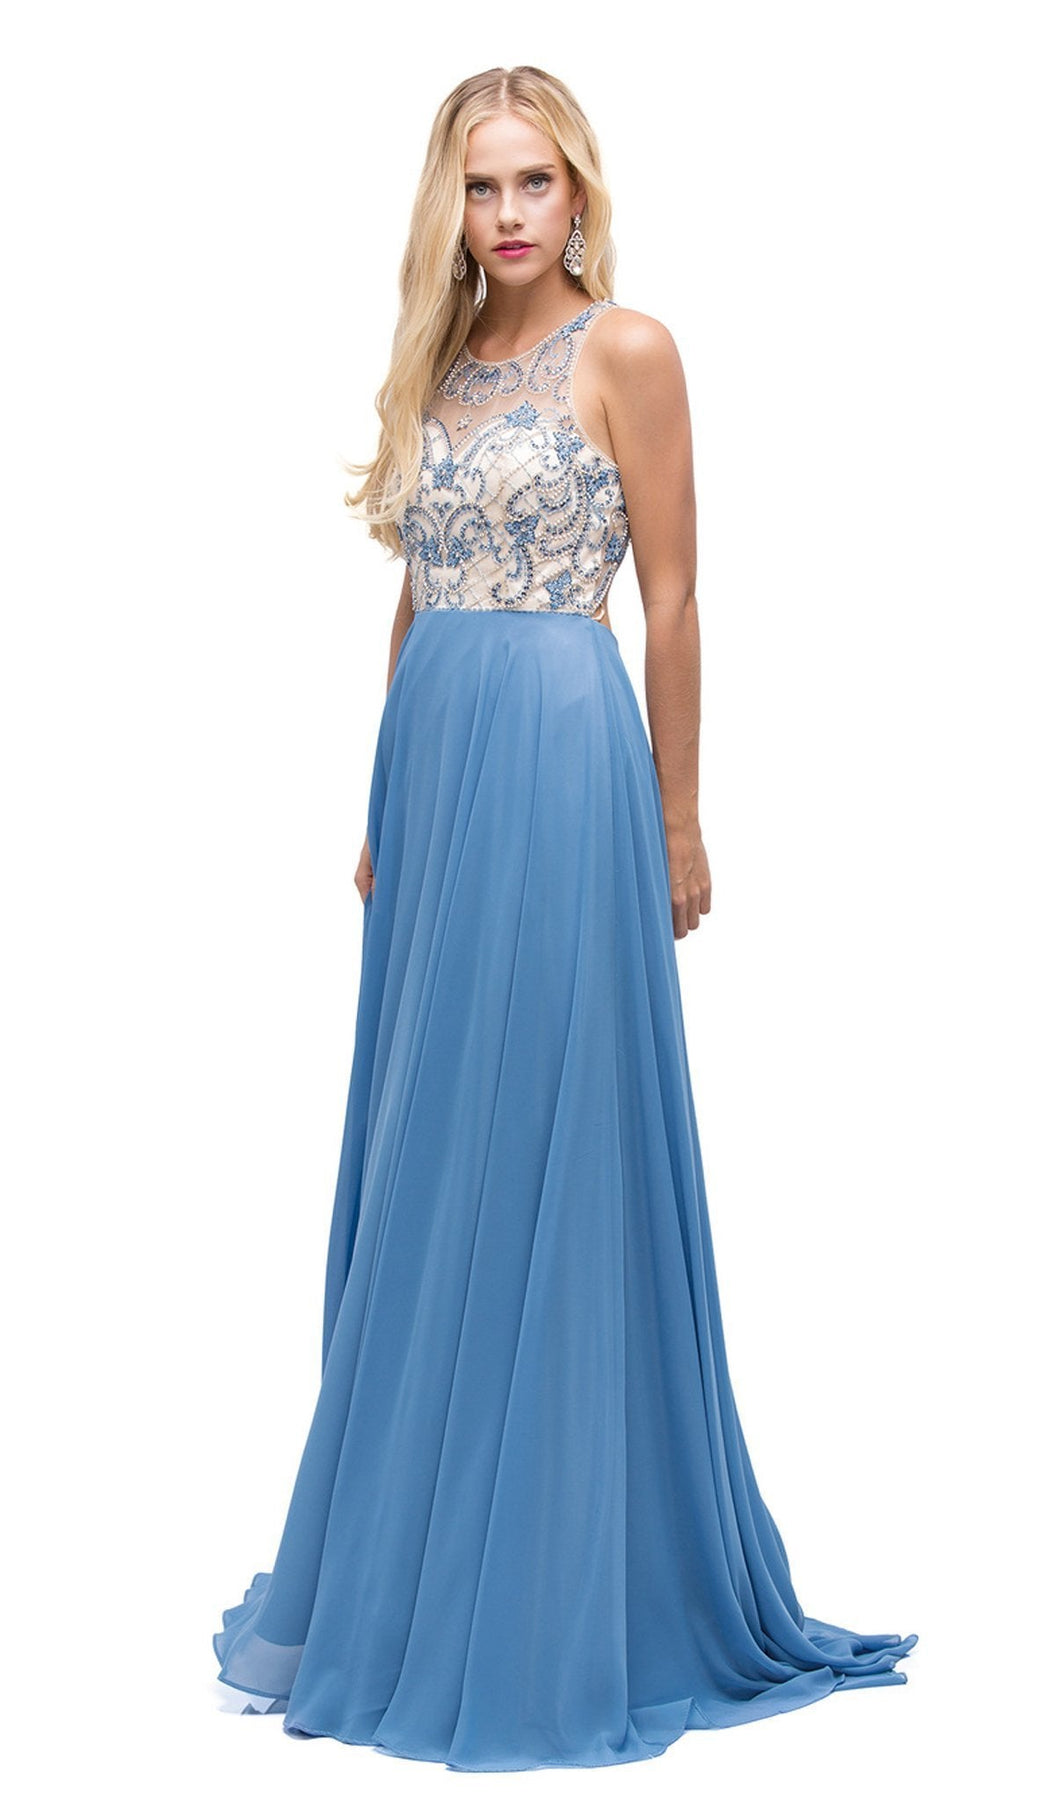 Dancing Queen - 9901 Beaded Illusion Scoop A-line Evening Dress Special Occasion Dress XS / Perry Blue